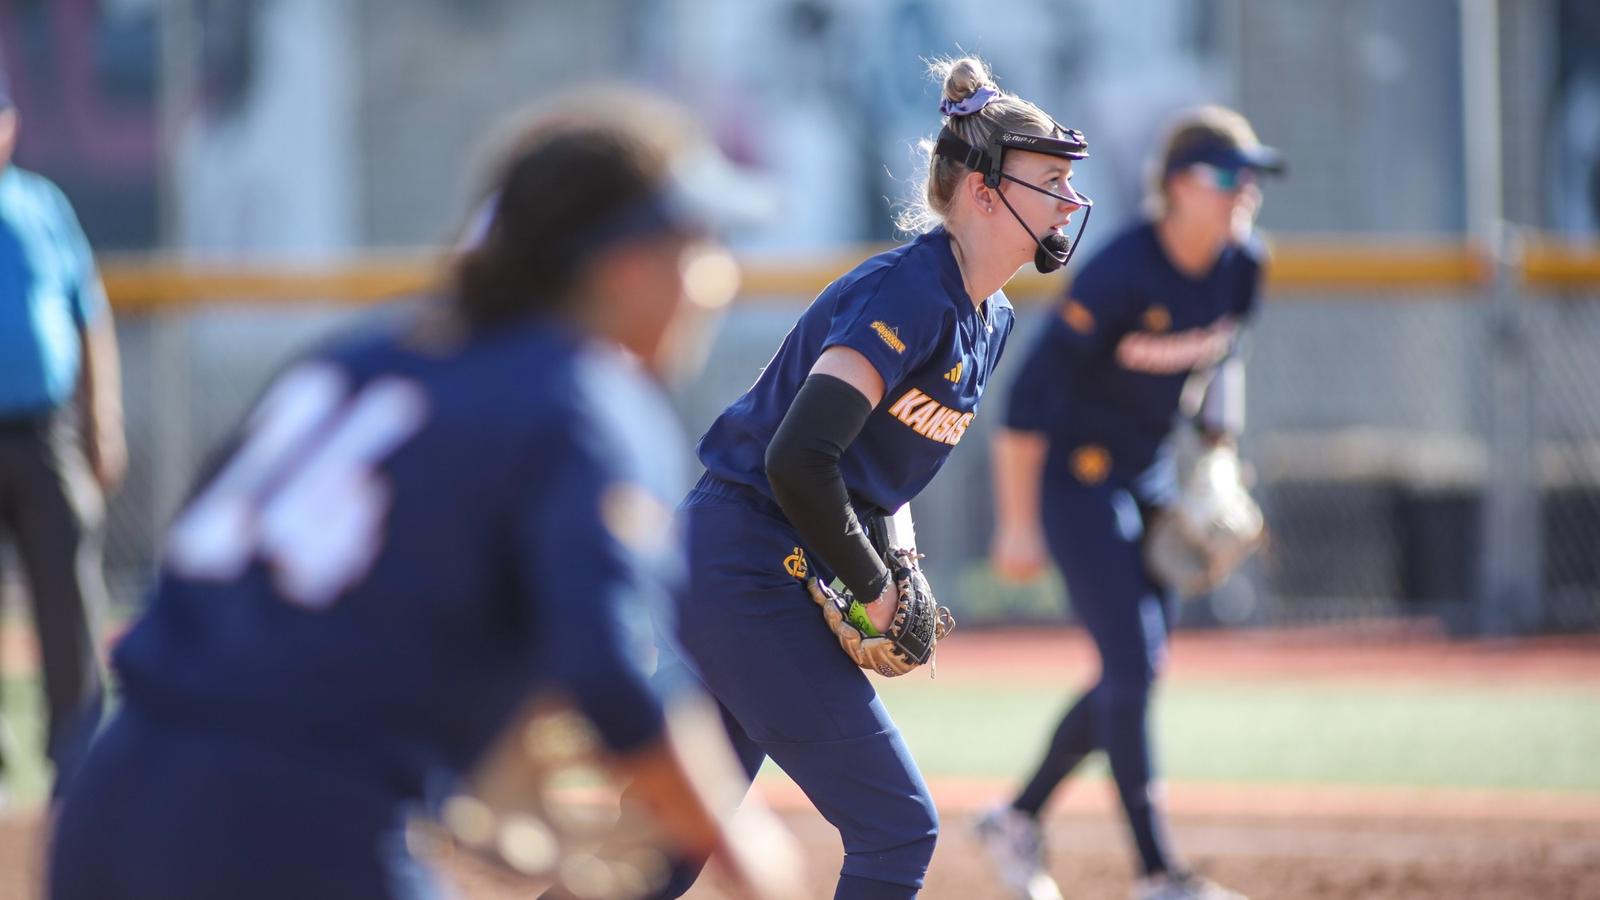 Kansas City Softball Pitcher Camryn Stickel Leads Roos to Shutout Victory over North Dakota in Pitching Duel